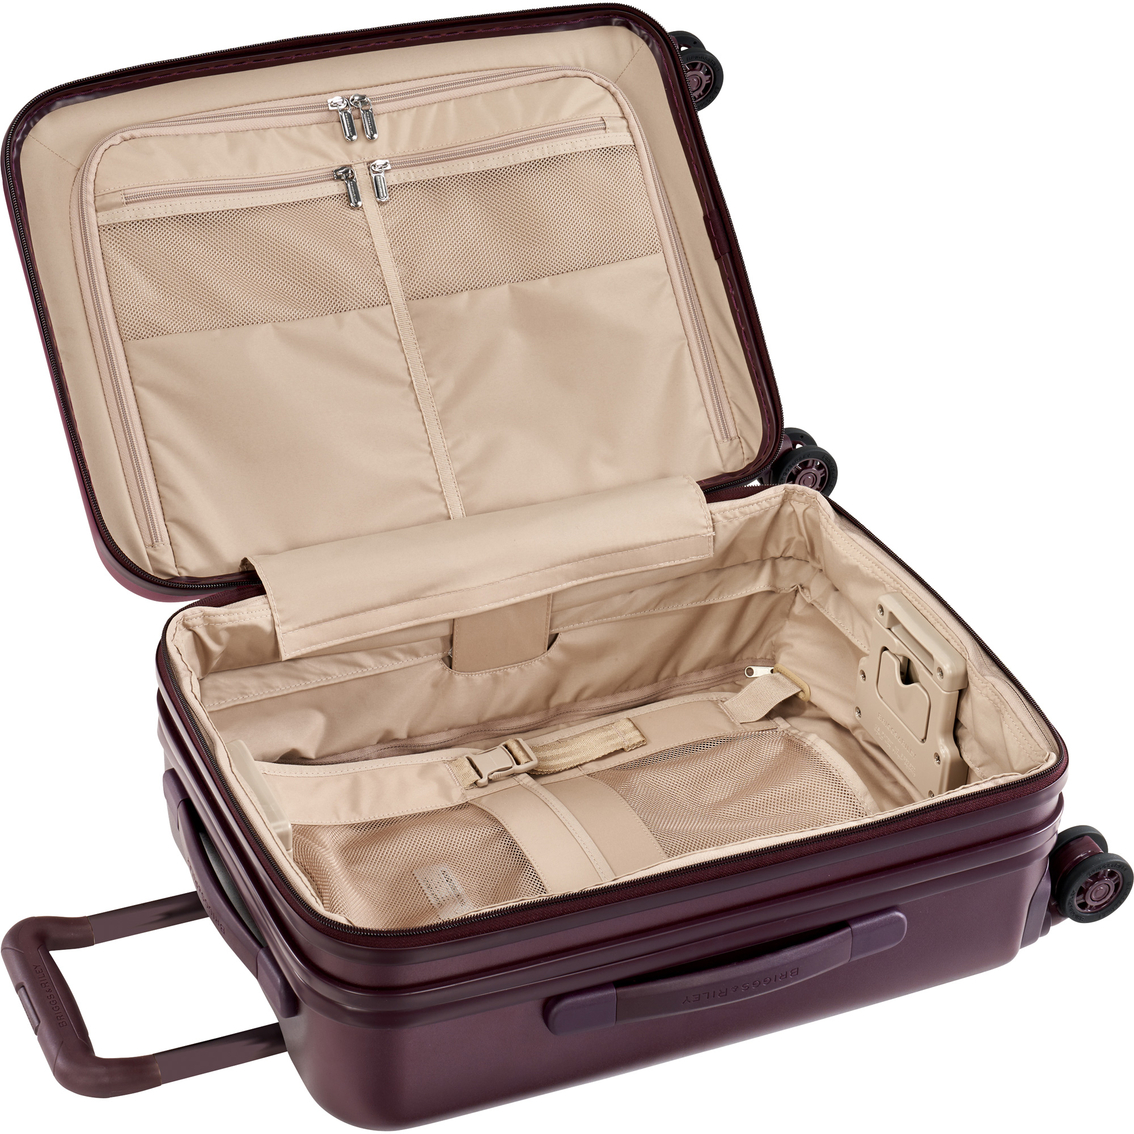 Briggs & Riley Sympatico International Carry On Spinner - Image 9 of 10